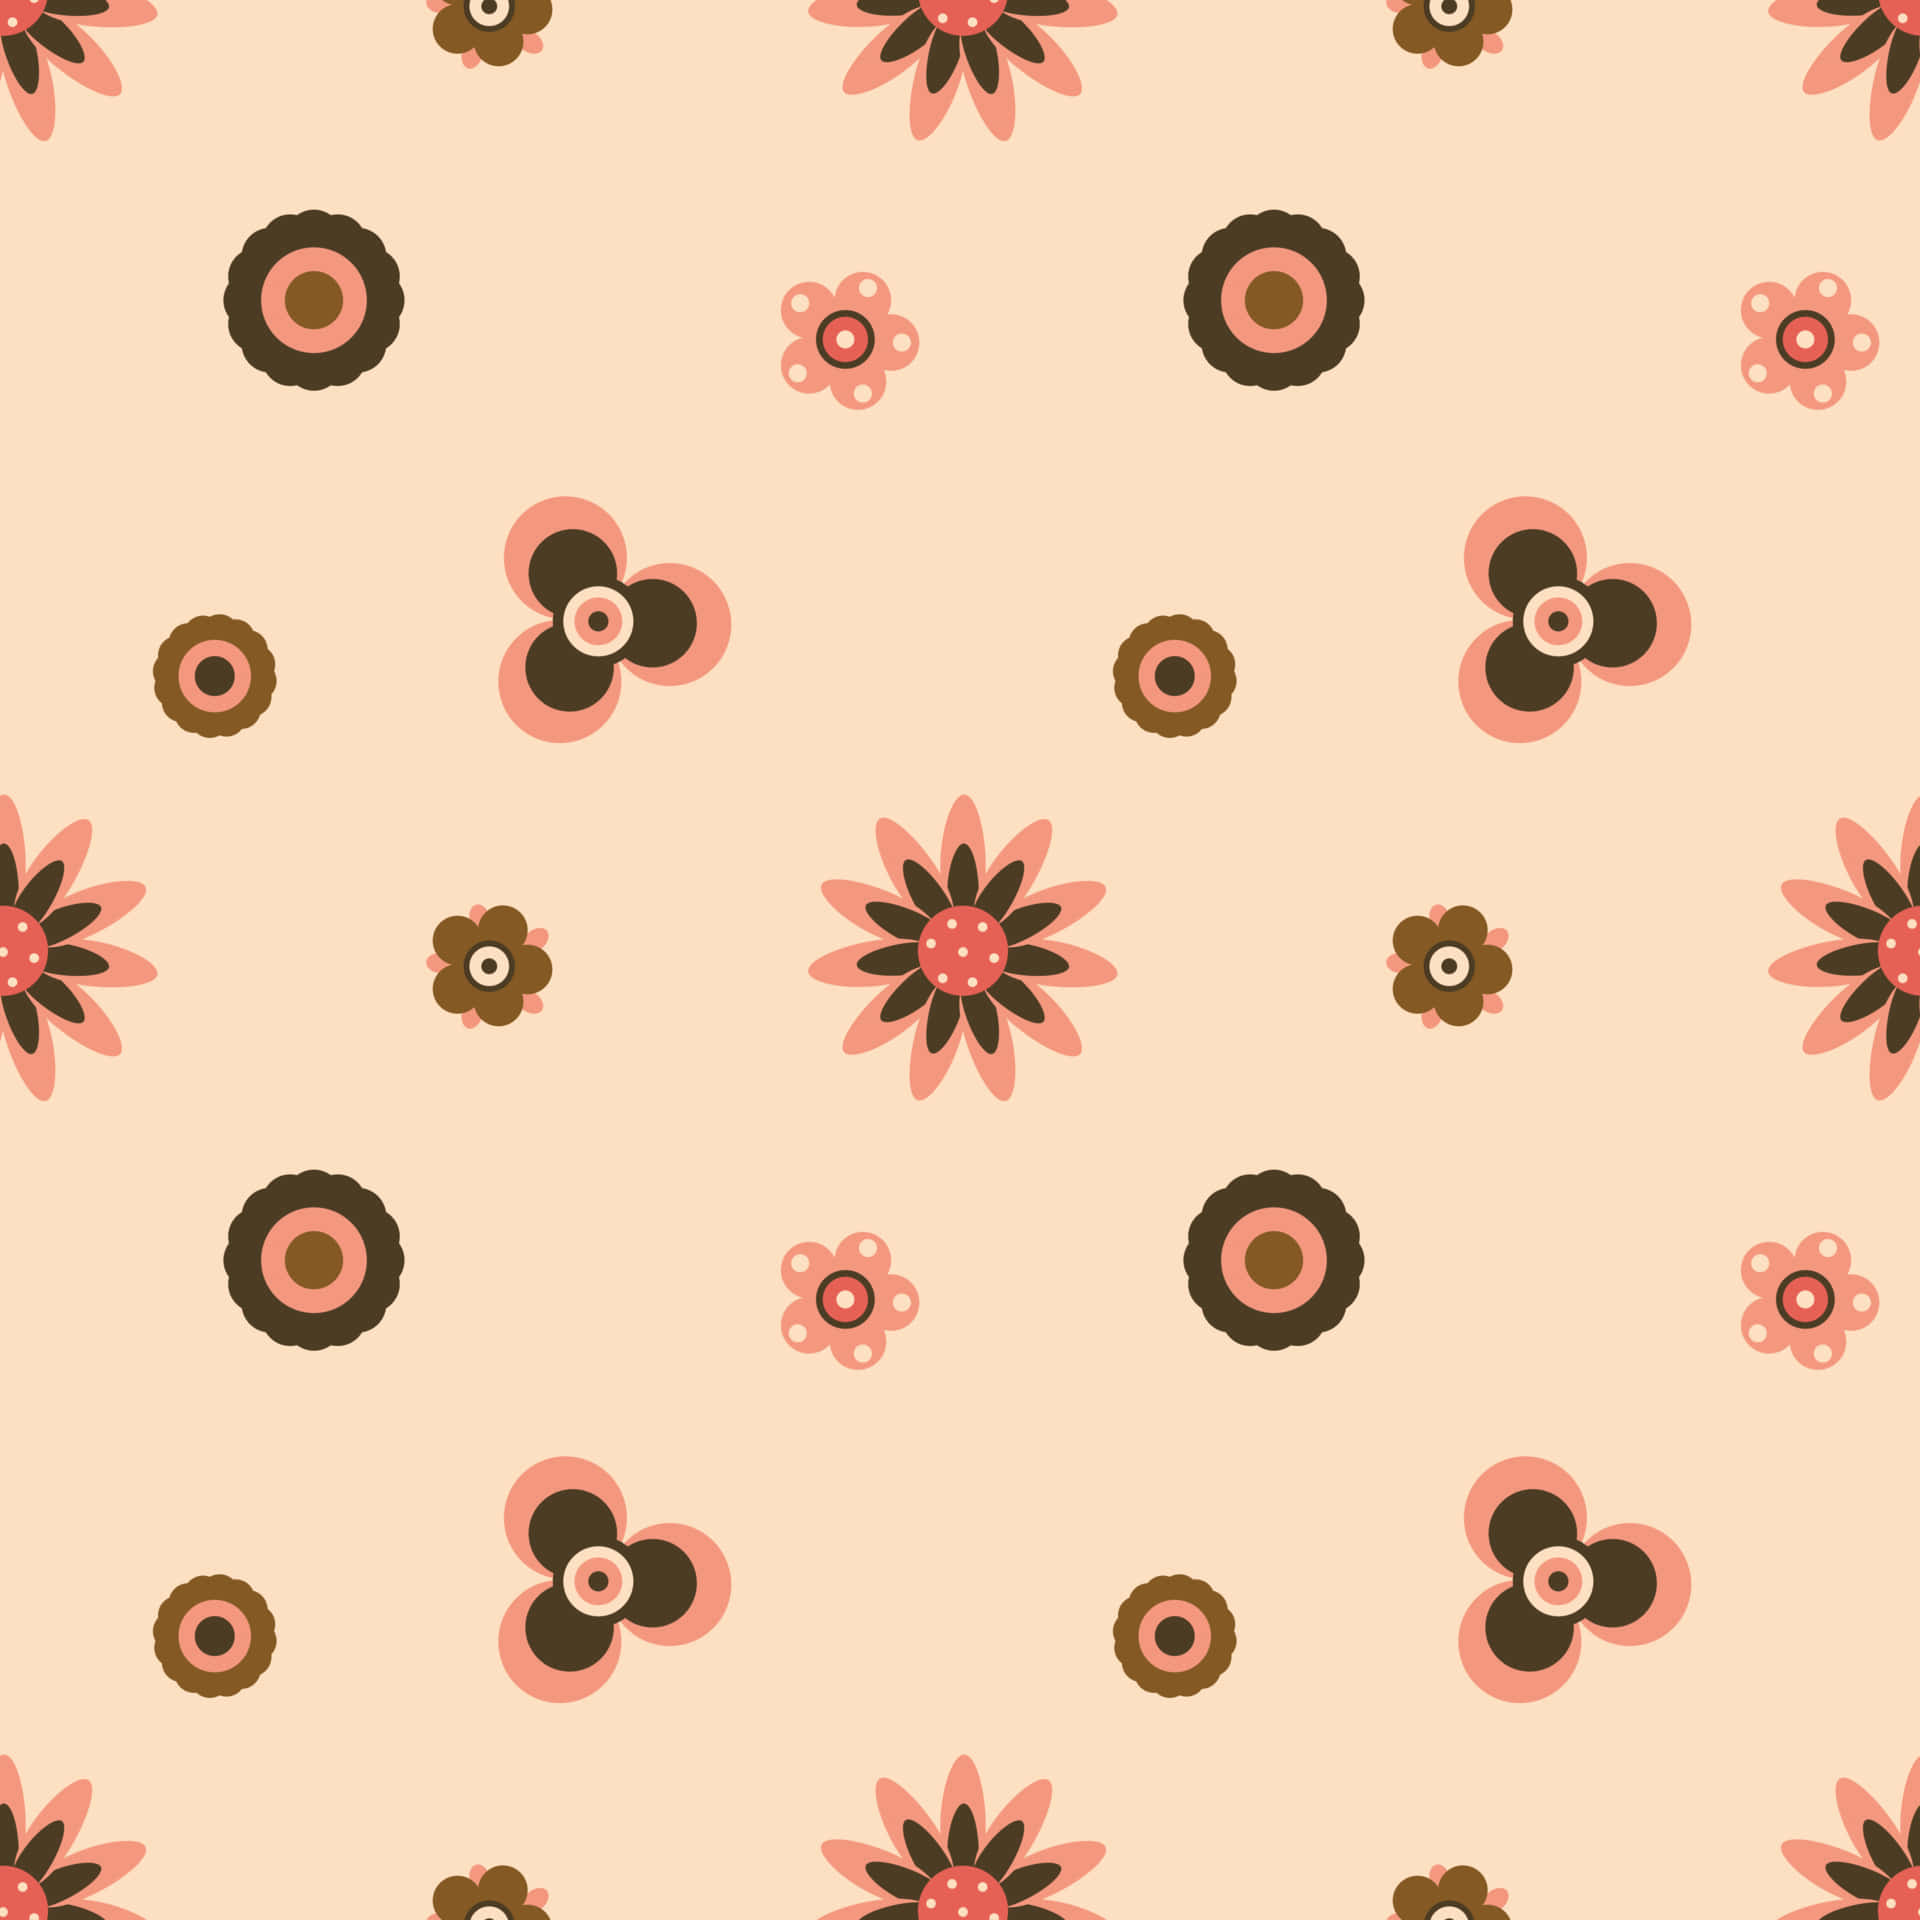 Enjoy the free-spirited style of the 70s with bold floral prints! Wallpaper